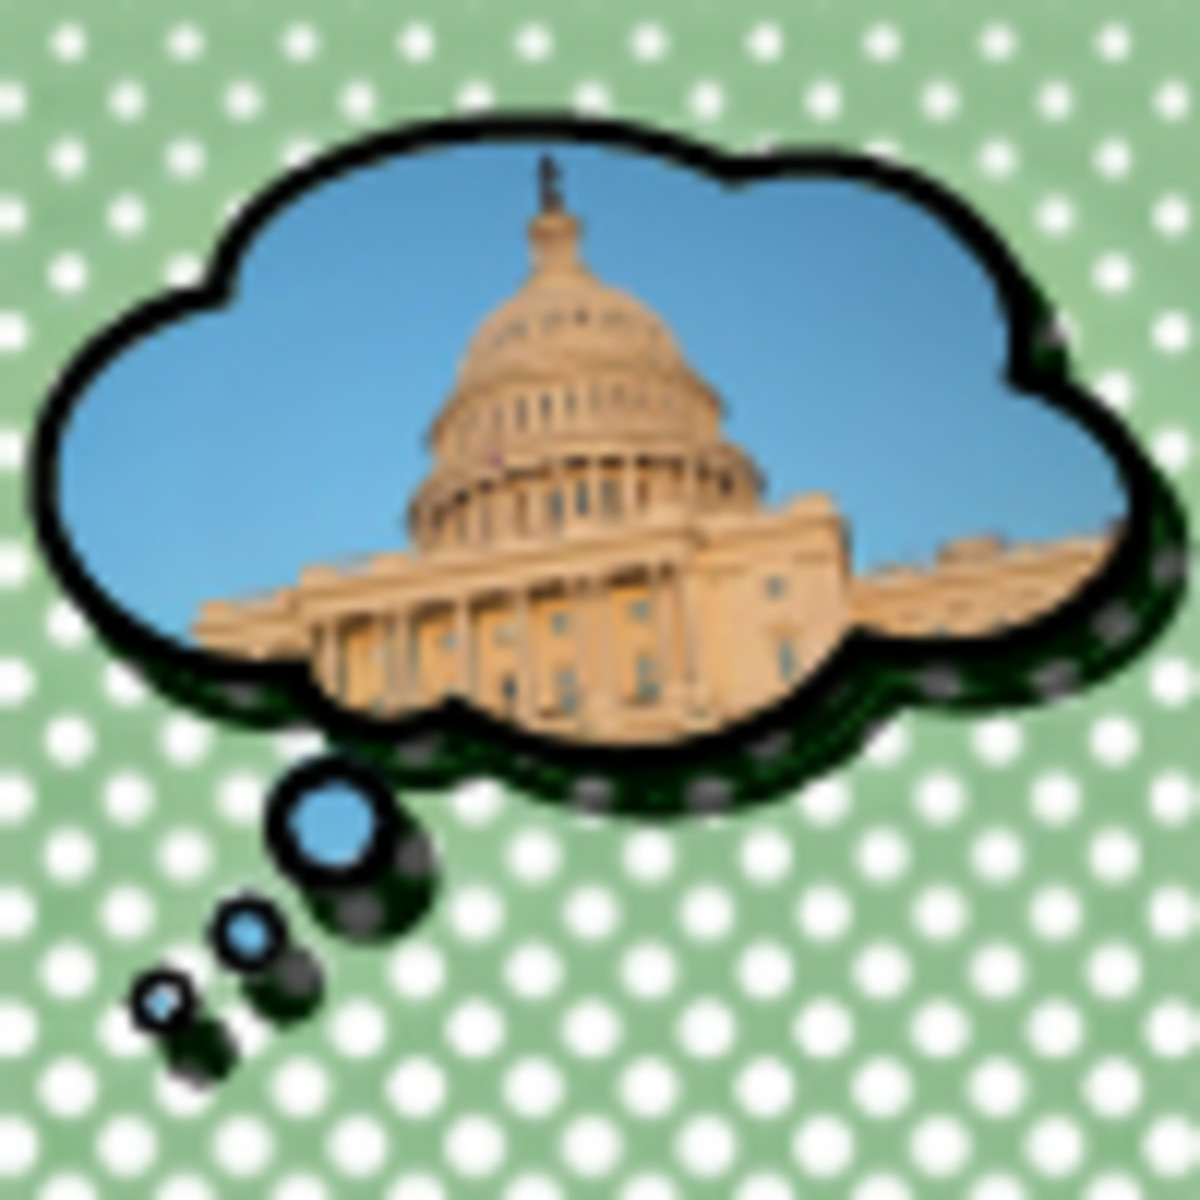 THE IDEA LOBBYMiller-McCune's Washington correspondent Emily Badger follows the ideas informing, explaining and influencing government, from the local think tank circuit to academic research that shapes D.C. policy from afar.